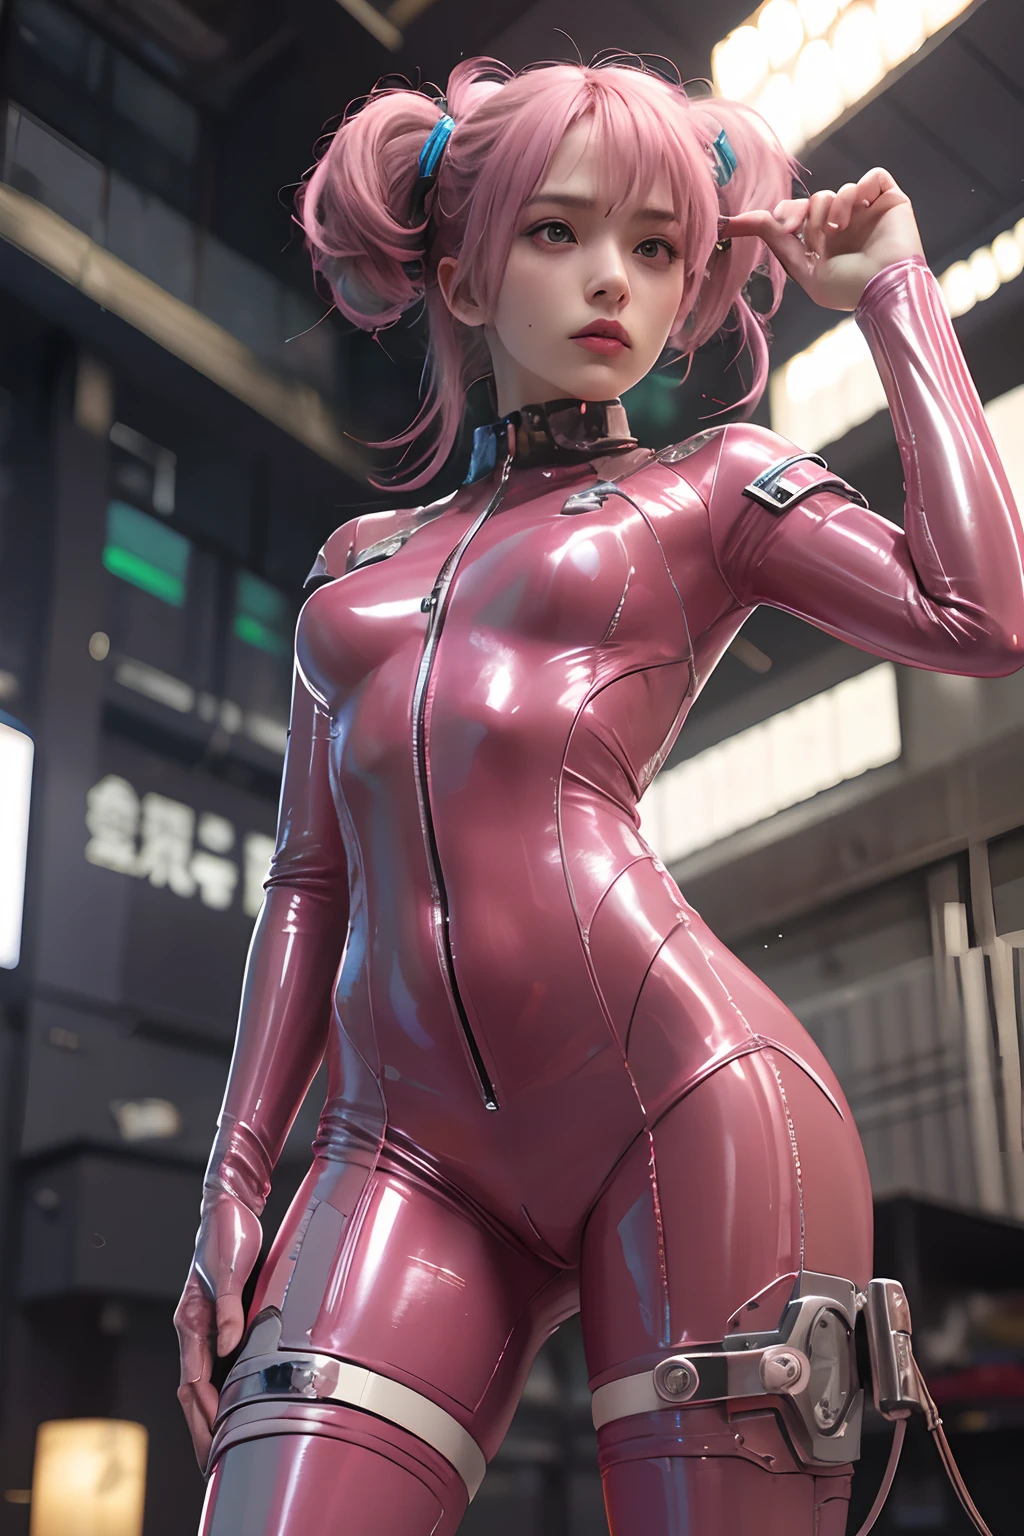 Top quality, Masterpiece, Ultra-high resolution, (Photorealistic: 1.4), RAW photo, 1 Cyberpunk Girl, Glossy glossy skin, 1 mechanical girl, (hyper realistic detailed)), (((Full body shot))), Global illumination, contrast, Shadows, Octane rendering, 8K, ultrasharp, raw skin, metals, Intricate Ornament Details, Japan Details, very complex details, Realistic light, CGSoation trend, Facing the camera, neon light detail, Mechanical limbs, Blood vessels connected to the tube, Mechanical vertebrae attached to the back, mechanical cervical attachment to the neck, wires and cables connecting to head, Gundam, Small LED lamps.(RAW photo:1.2)，Pink latex jumpsuit，Hollow-out on，Holt collar, latex shiny,tight-fitting，sweat leggs，， Pink body, wearing atsuko kudo latex outfit, wearing tight suit, Smooth pink skin, catsuits, Wearing latex, shiny plastic, shiny metalslic glossy skin, The color of pink glow, latex outfit, chrome bodysuit, cyberpunk glossy latex suit, Shiny, futuristic glossy latex suit　spread their legs　M-shaped legs　angry look　sullenness　Irritated， all over body，